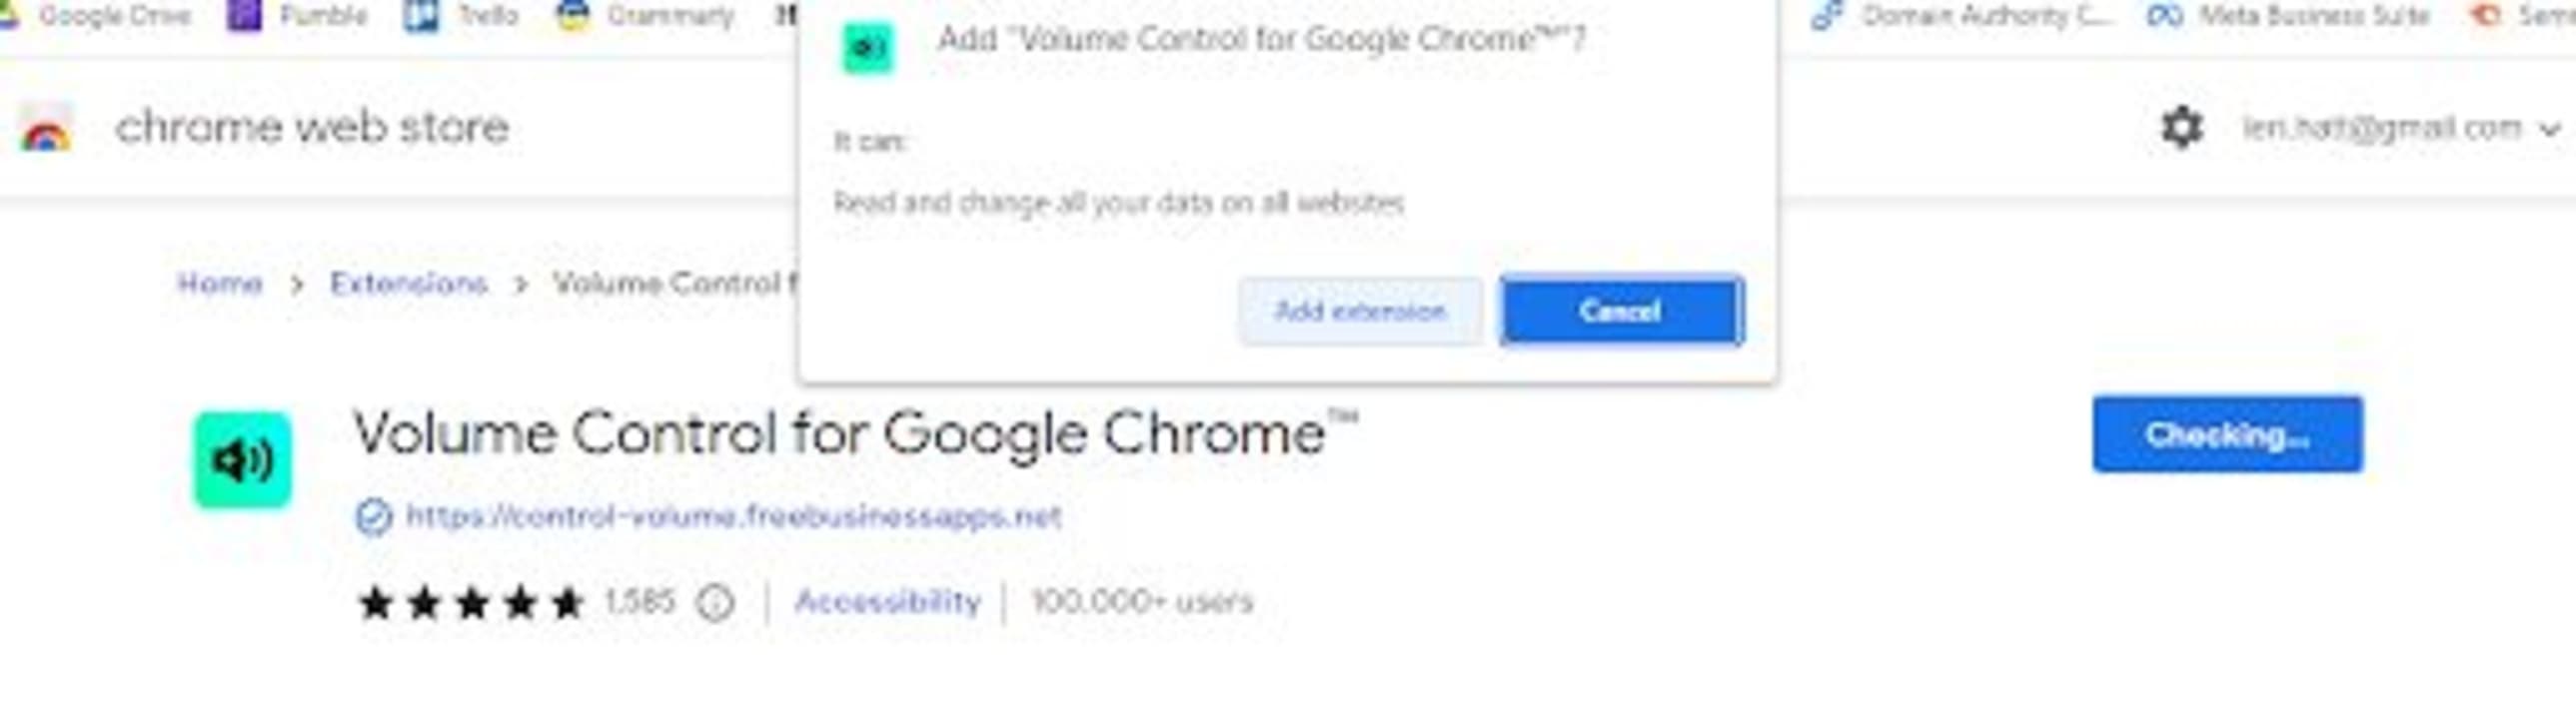 How to use the Volume Control for Google Chrome